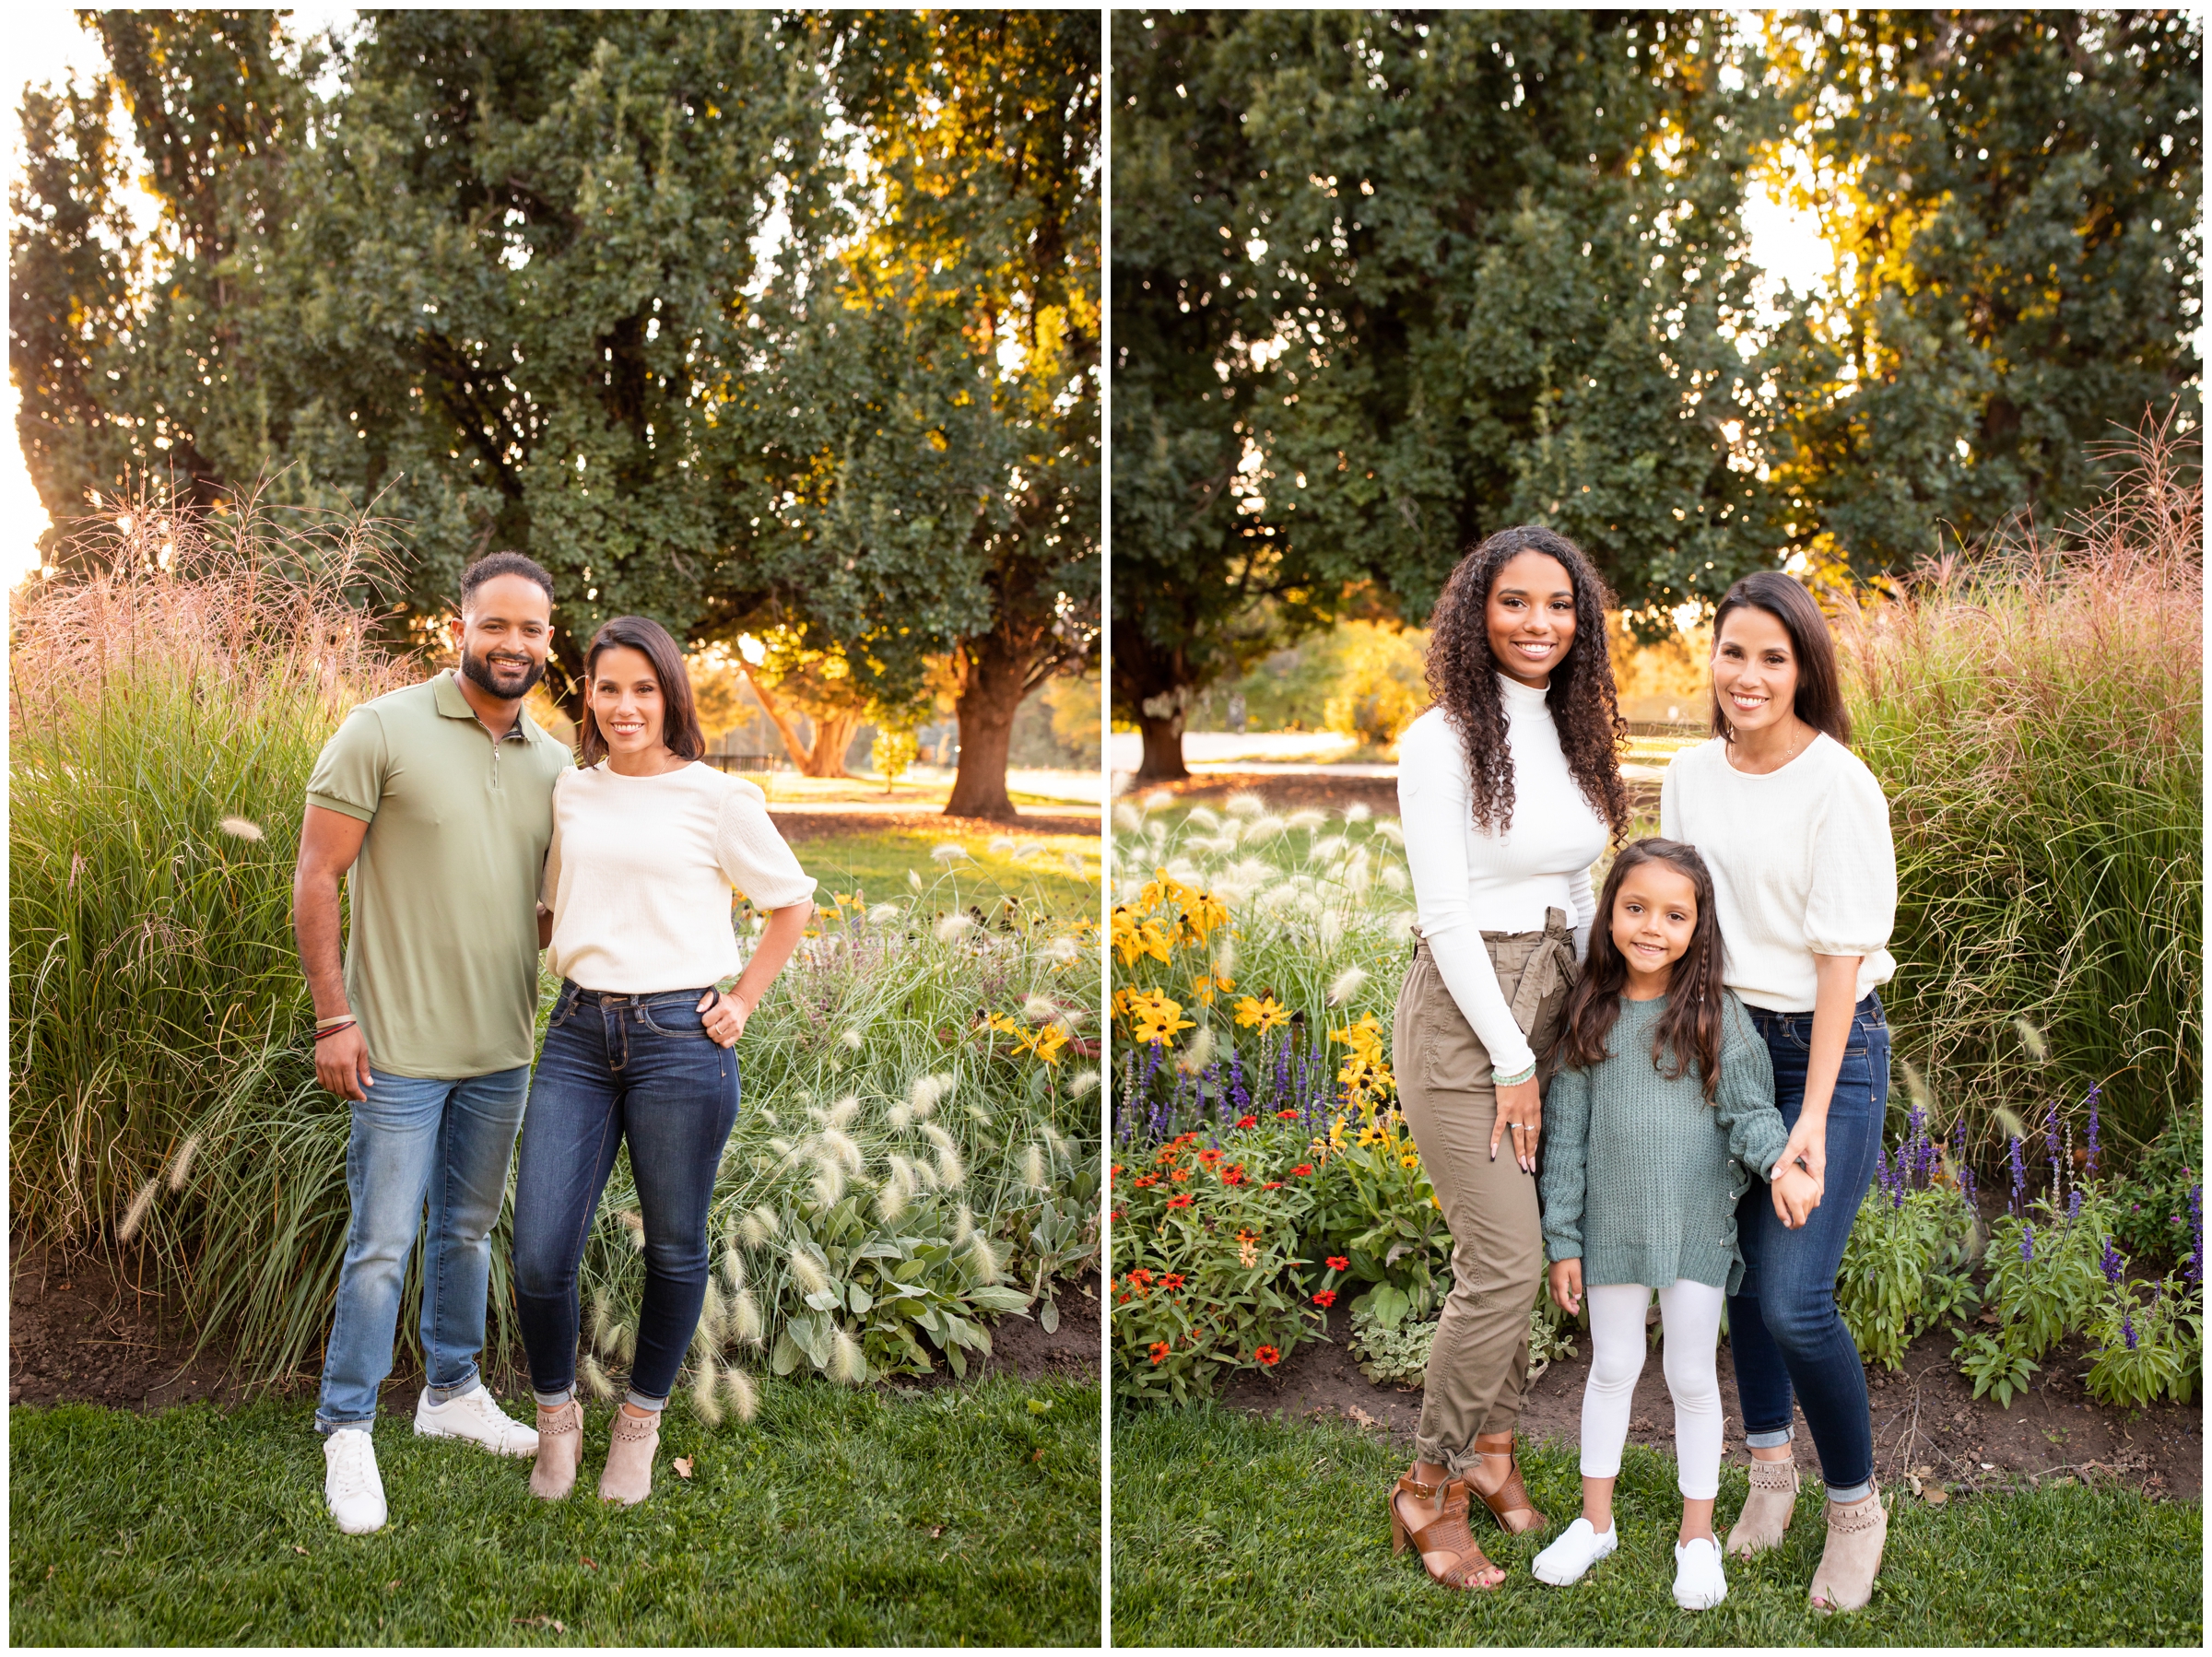 Denver Colorado family portraits at Cheesman Park by Northern CO photographer Plum Pretty Photography